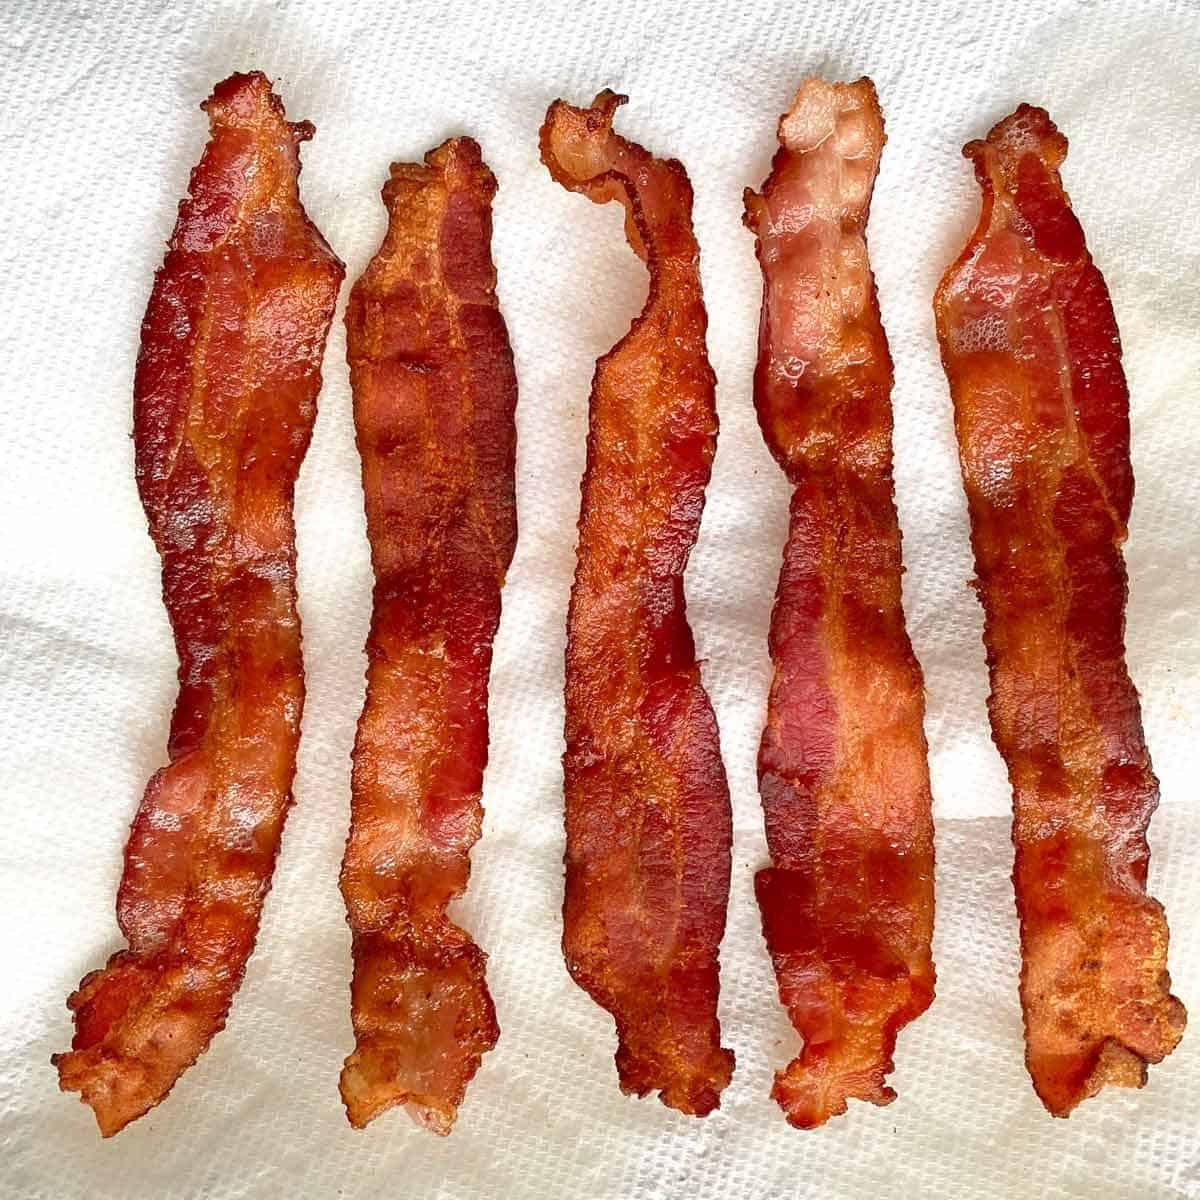 5 strips of cooked bacon draining on paper towels.